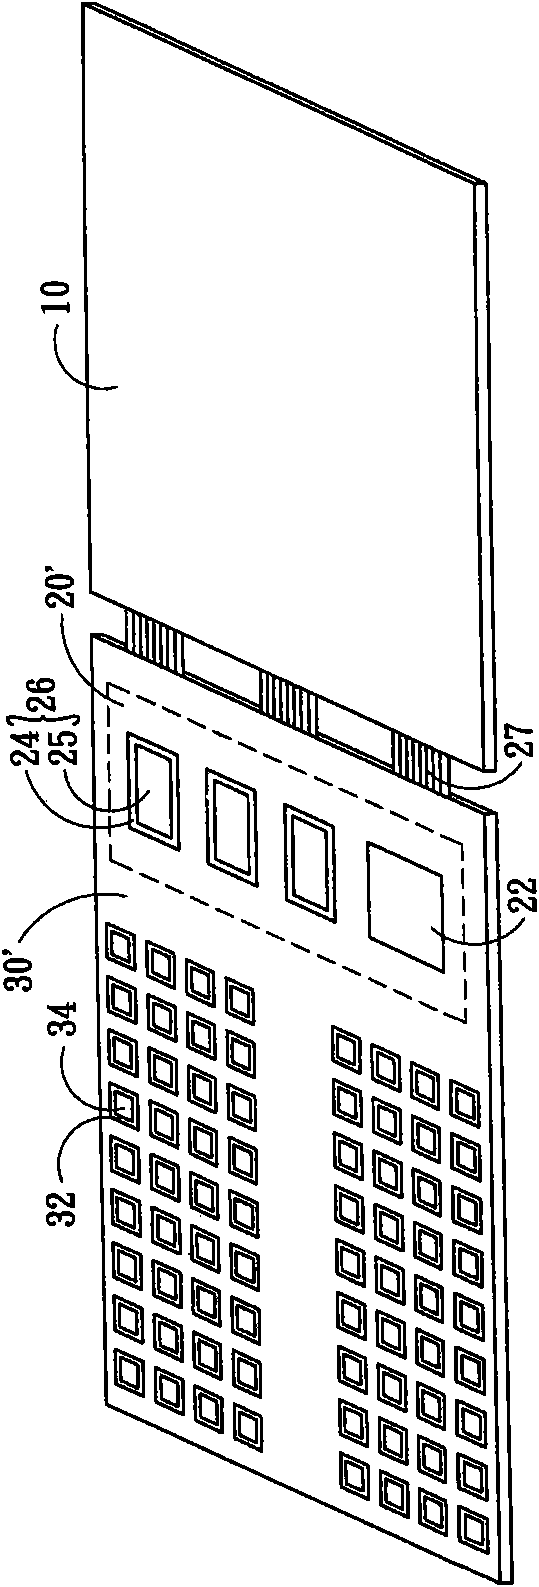 System and method for burning chips